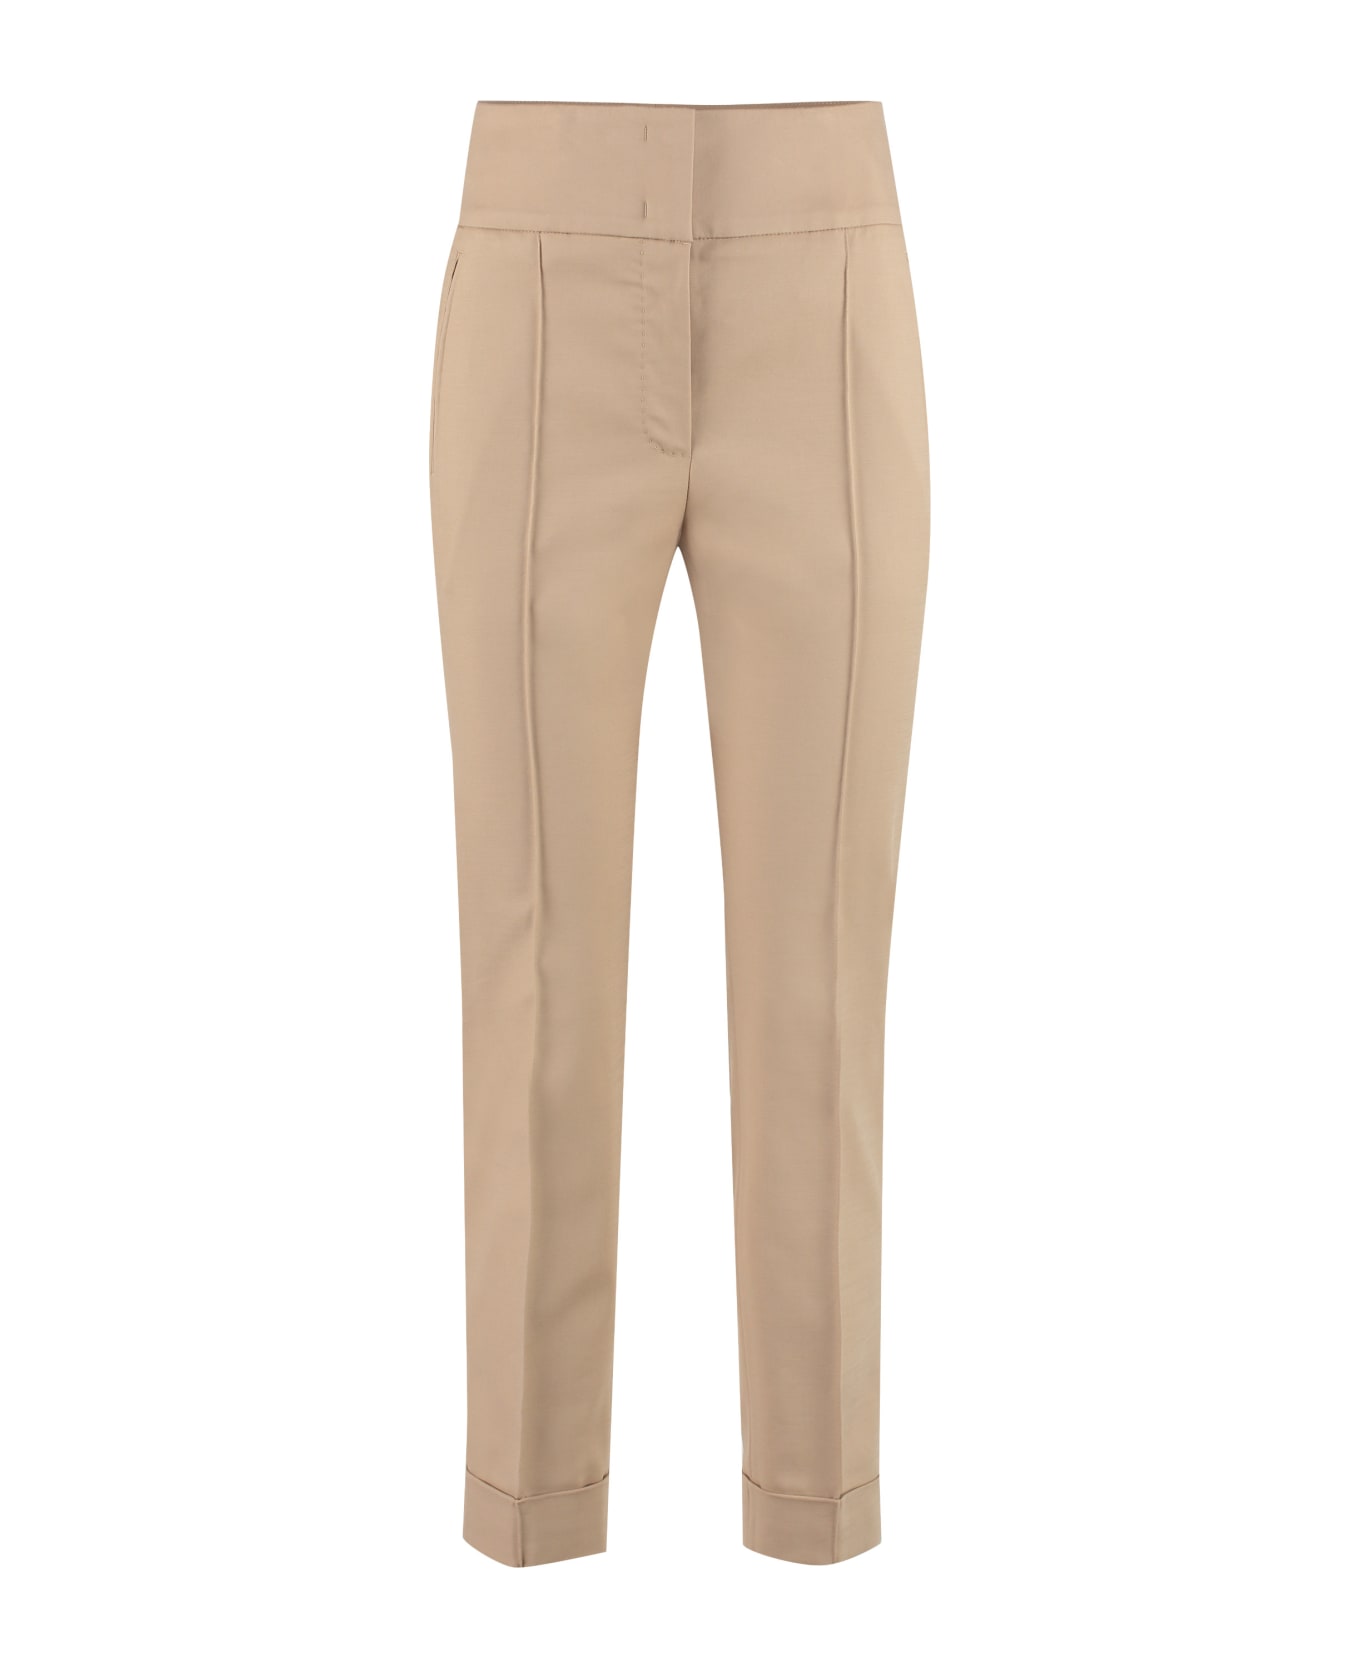 Peserico High-rise Cotton Trousers - Beige